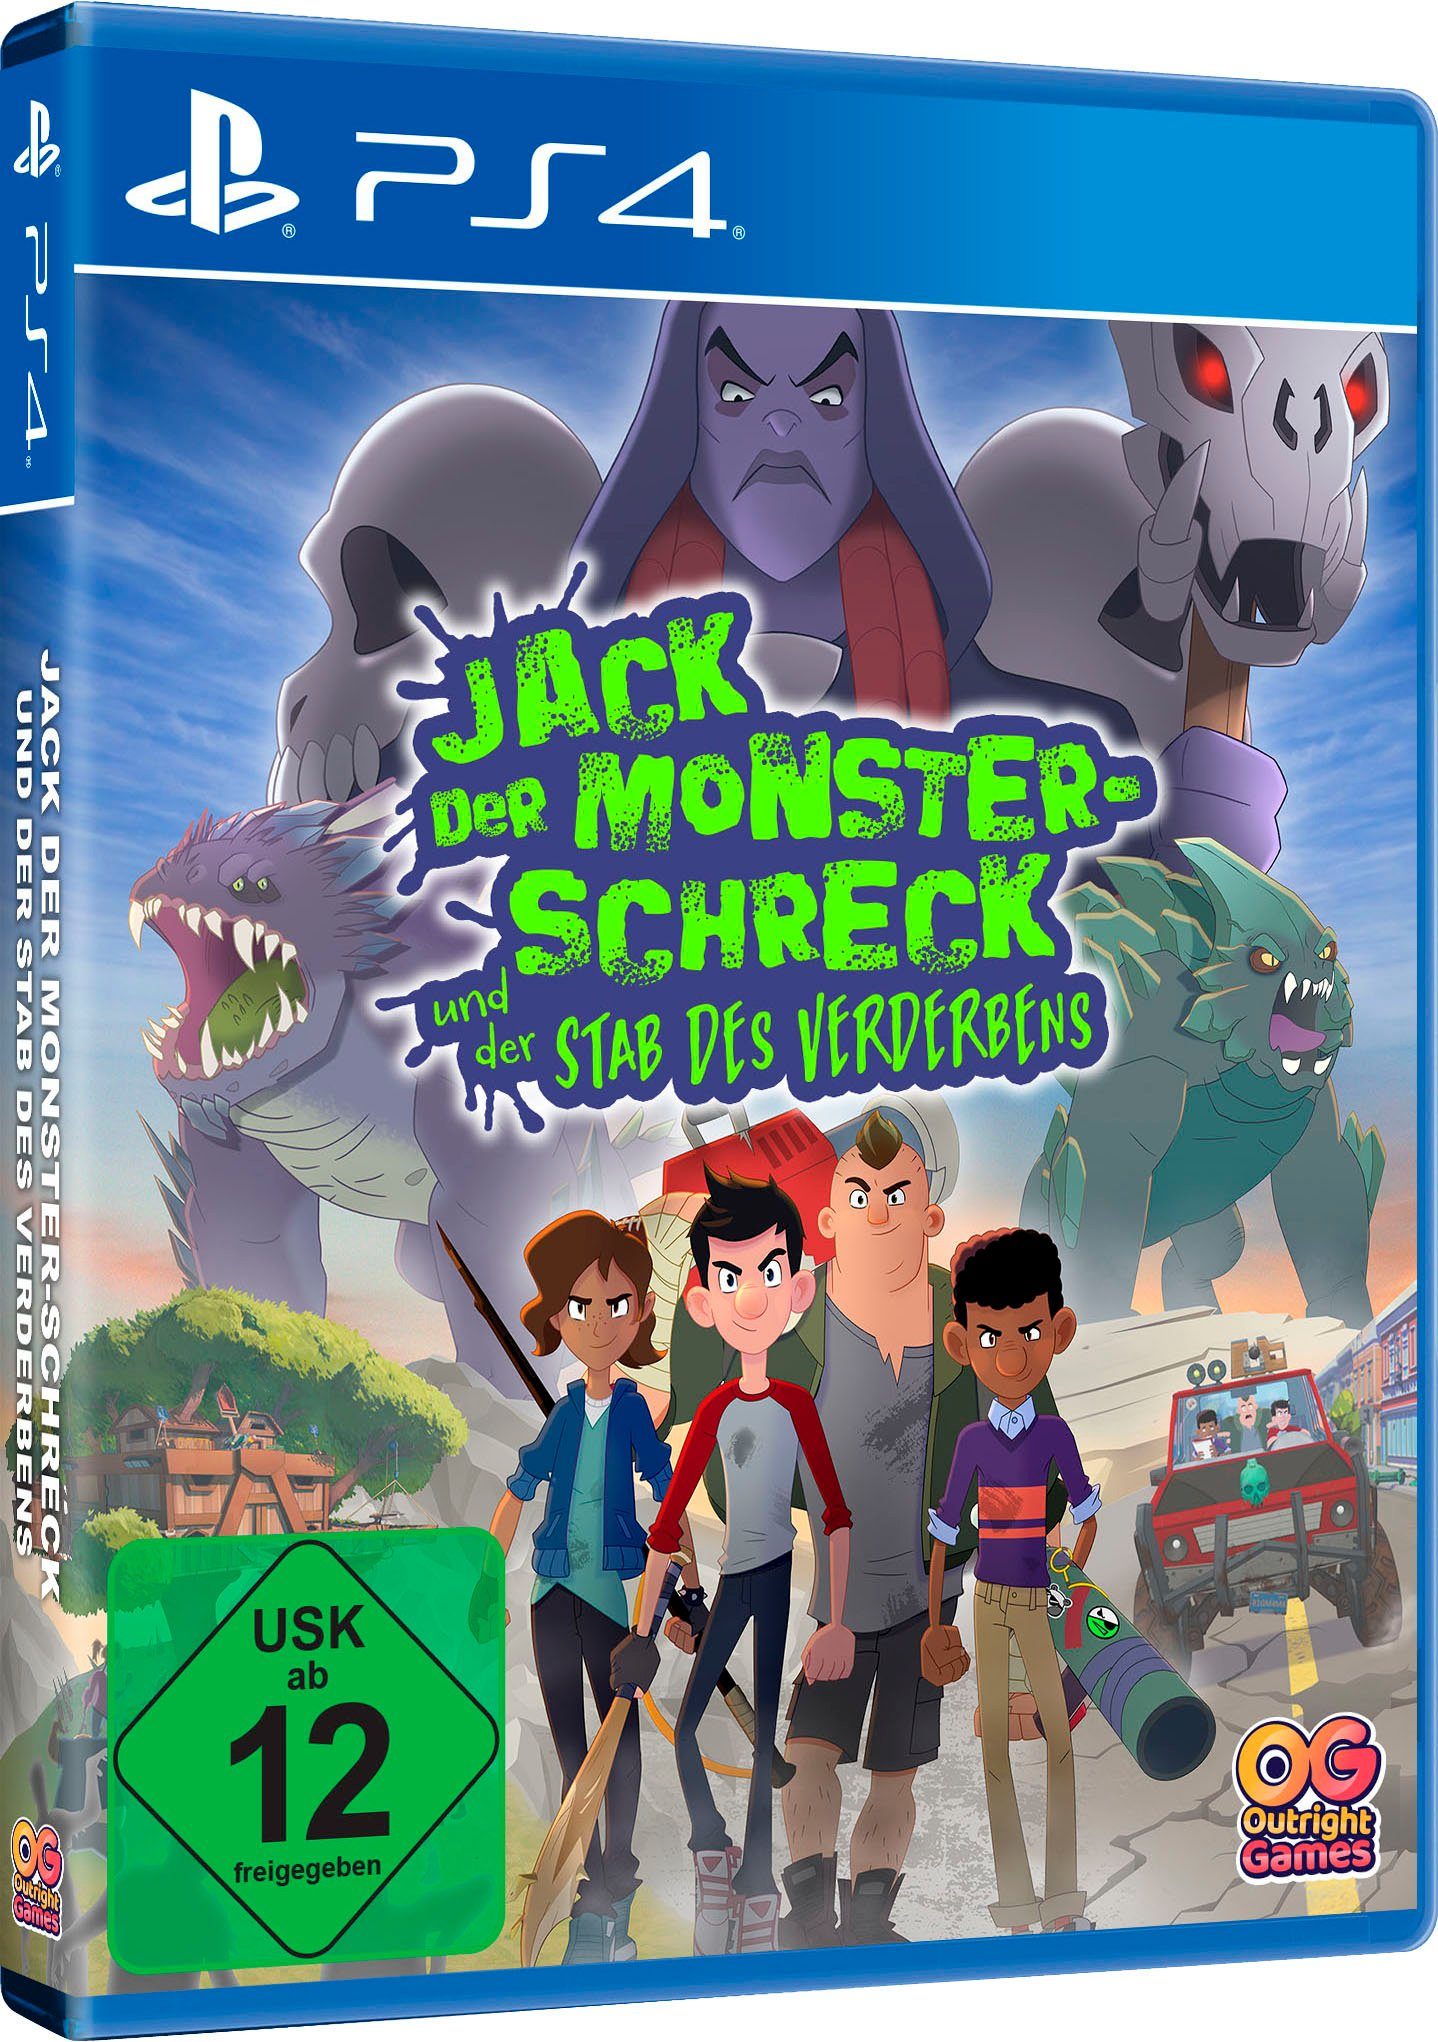 Games (The Kids Last Monsterschreck der PlayStation on Earth) Outright Jack, 4